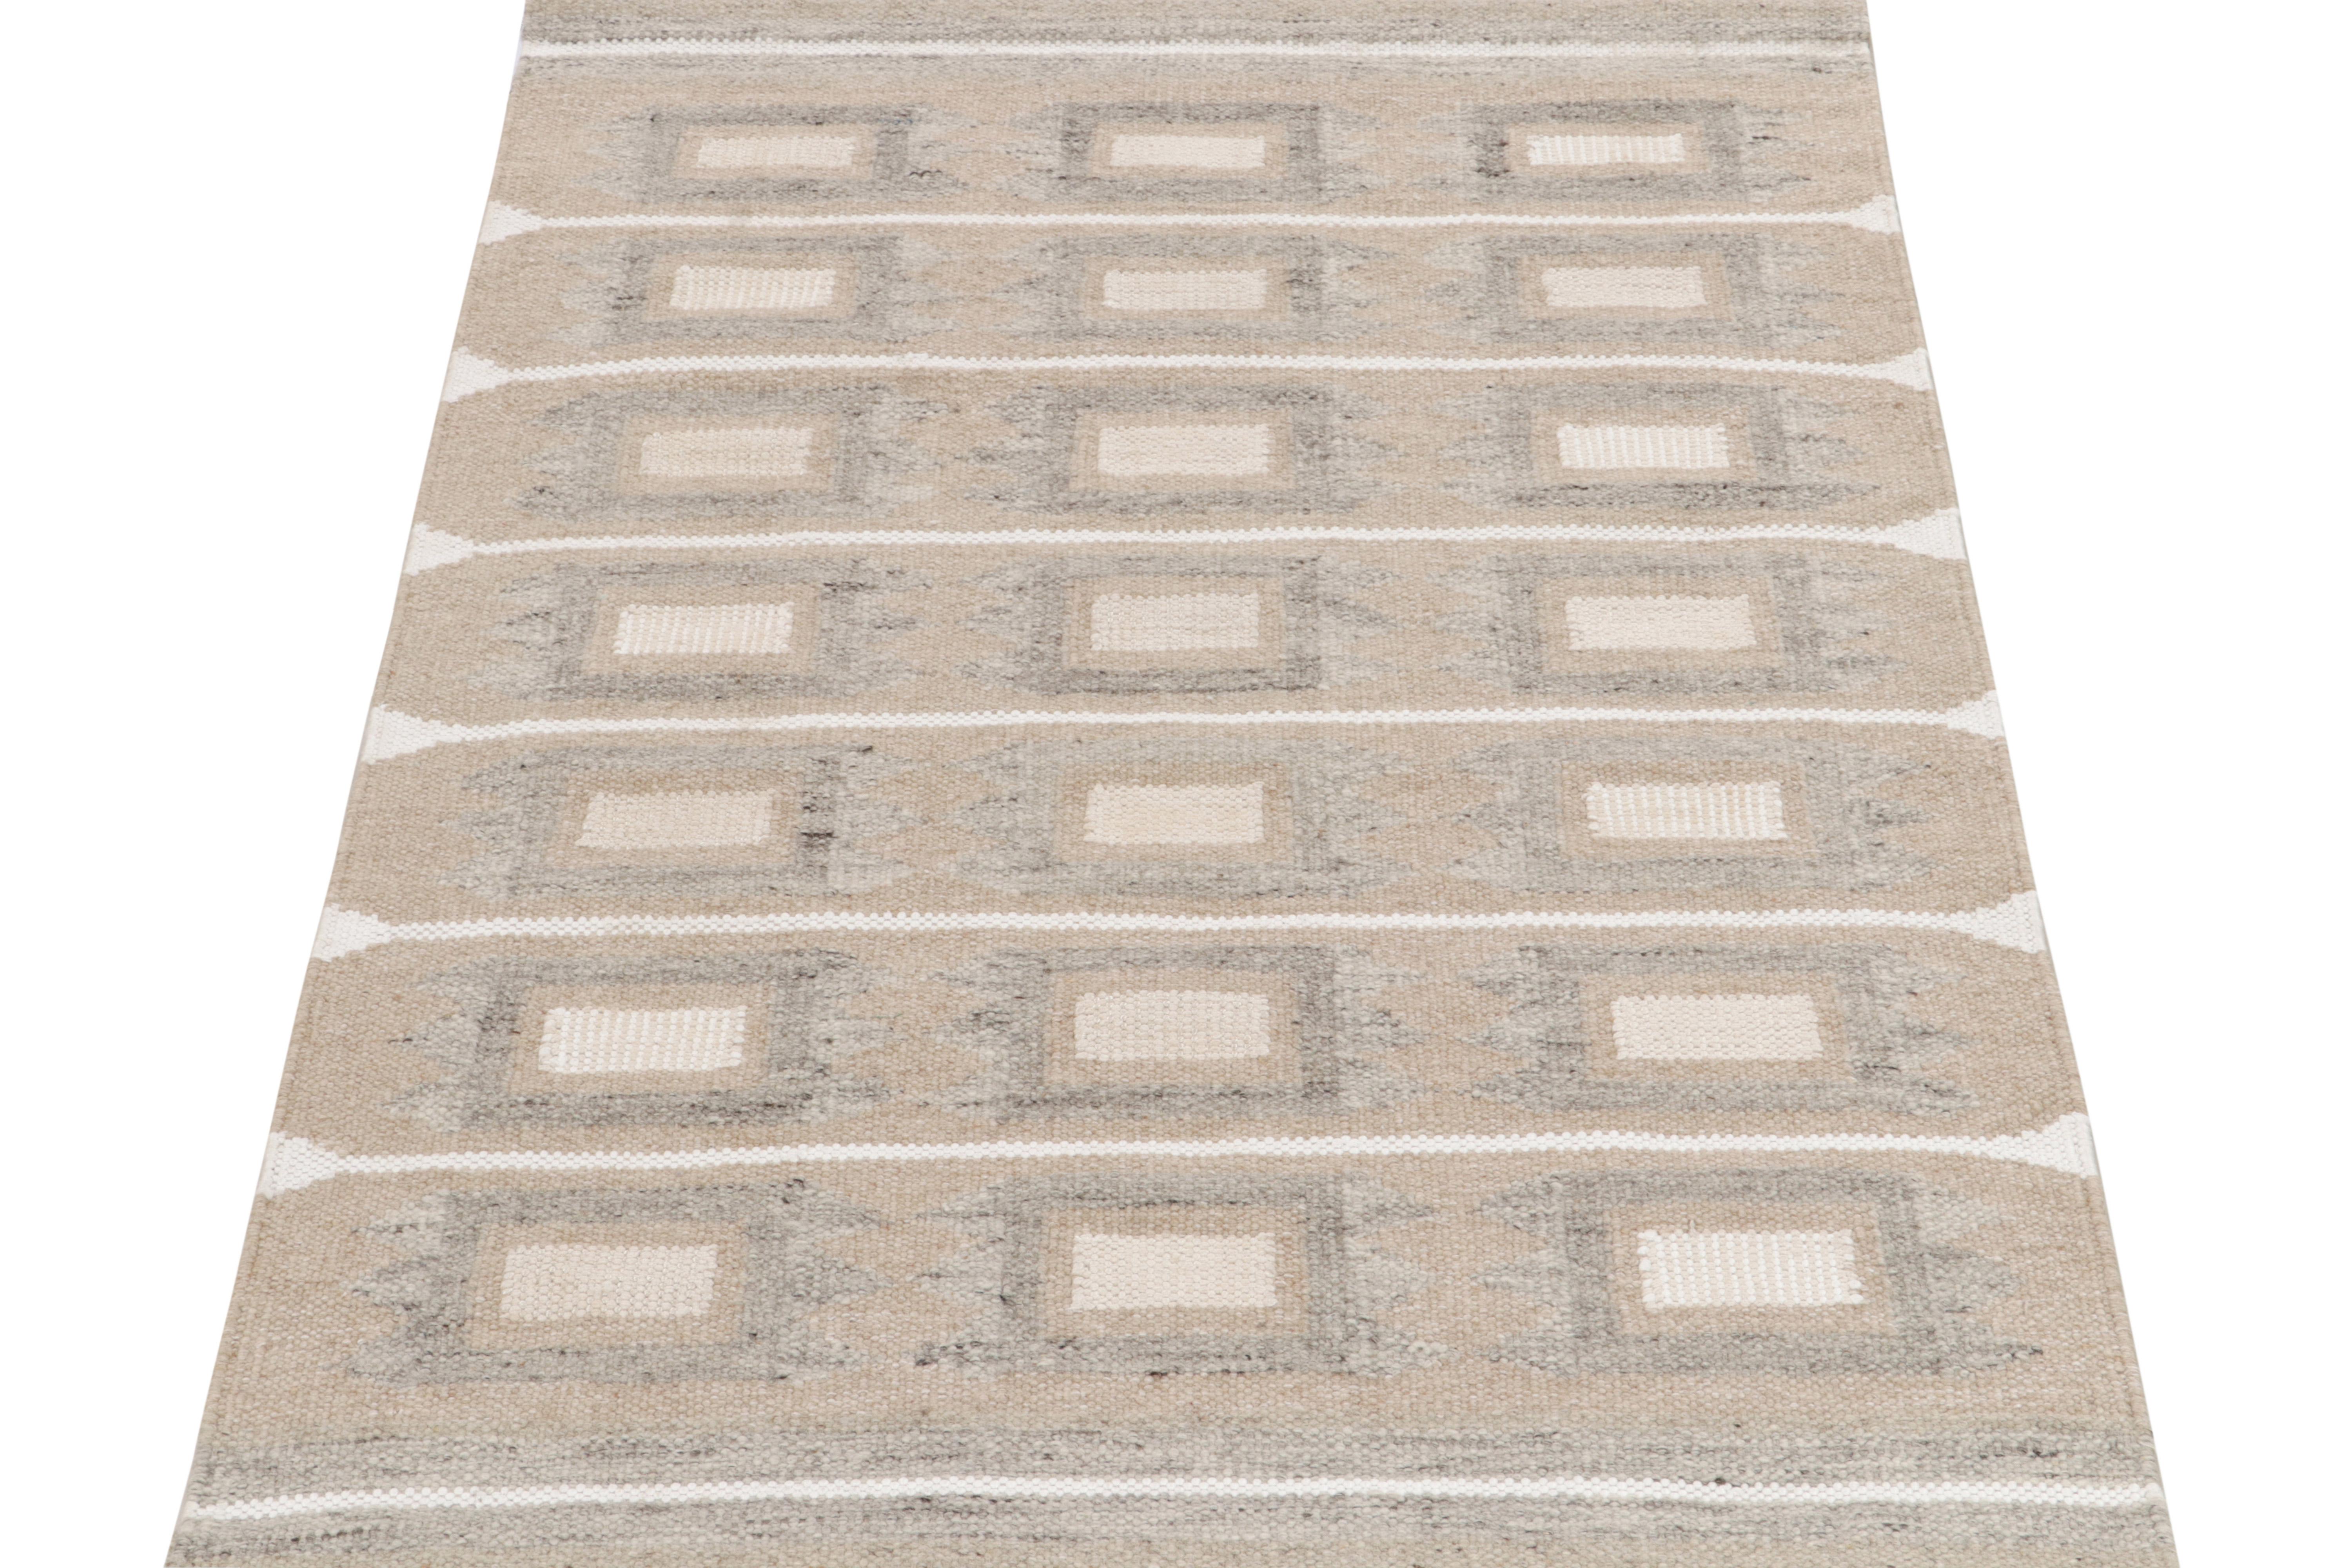 Handwoven in wool, a smart take on Swedish flatweaves from Rug & Kilim’s acclaimed Scandinavian Kilim collection. The 4x6 rug features an interplay of geometric repetition on defined panels in subtle tones of brown, white & gray further—all